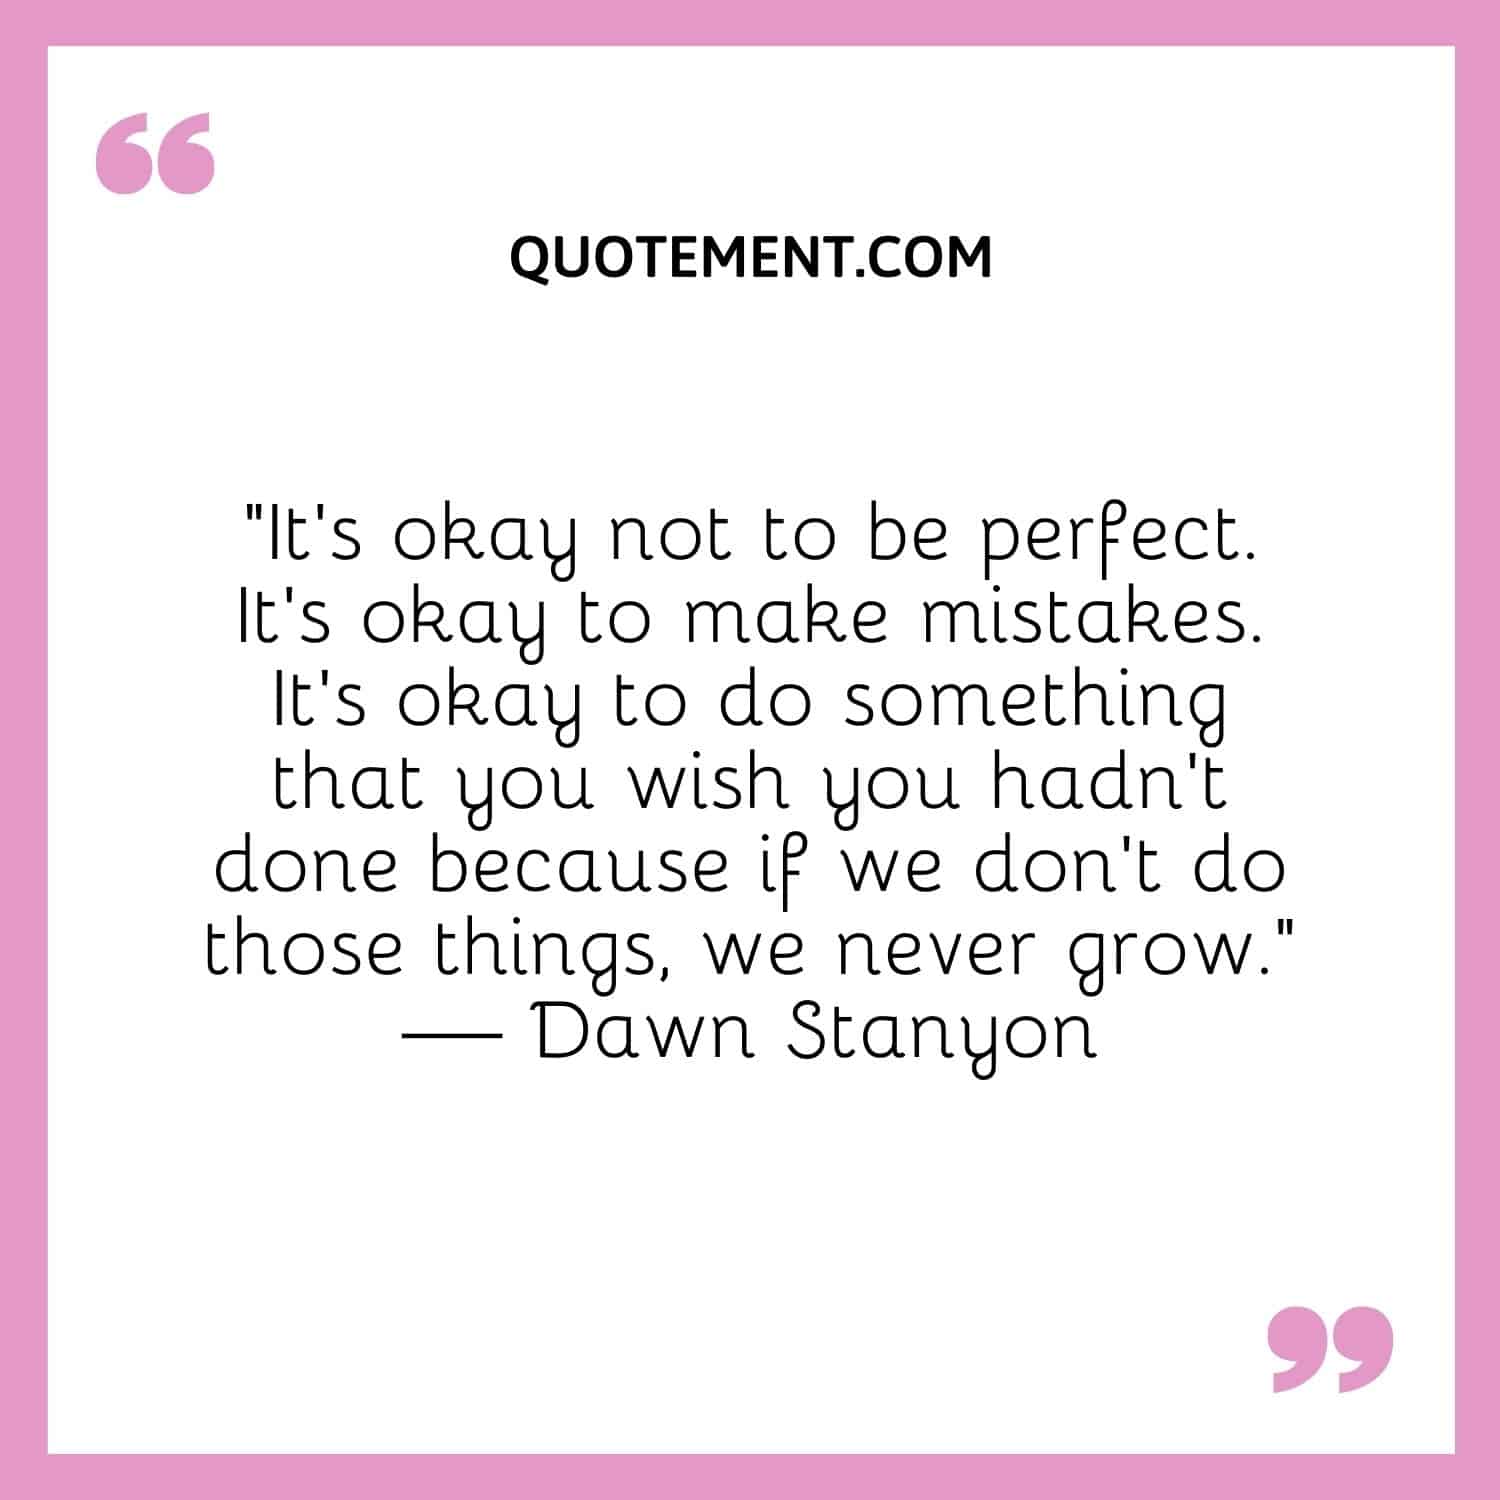 It’s okay not to be perfect.